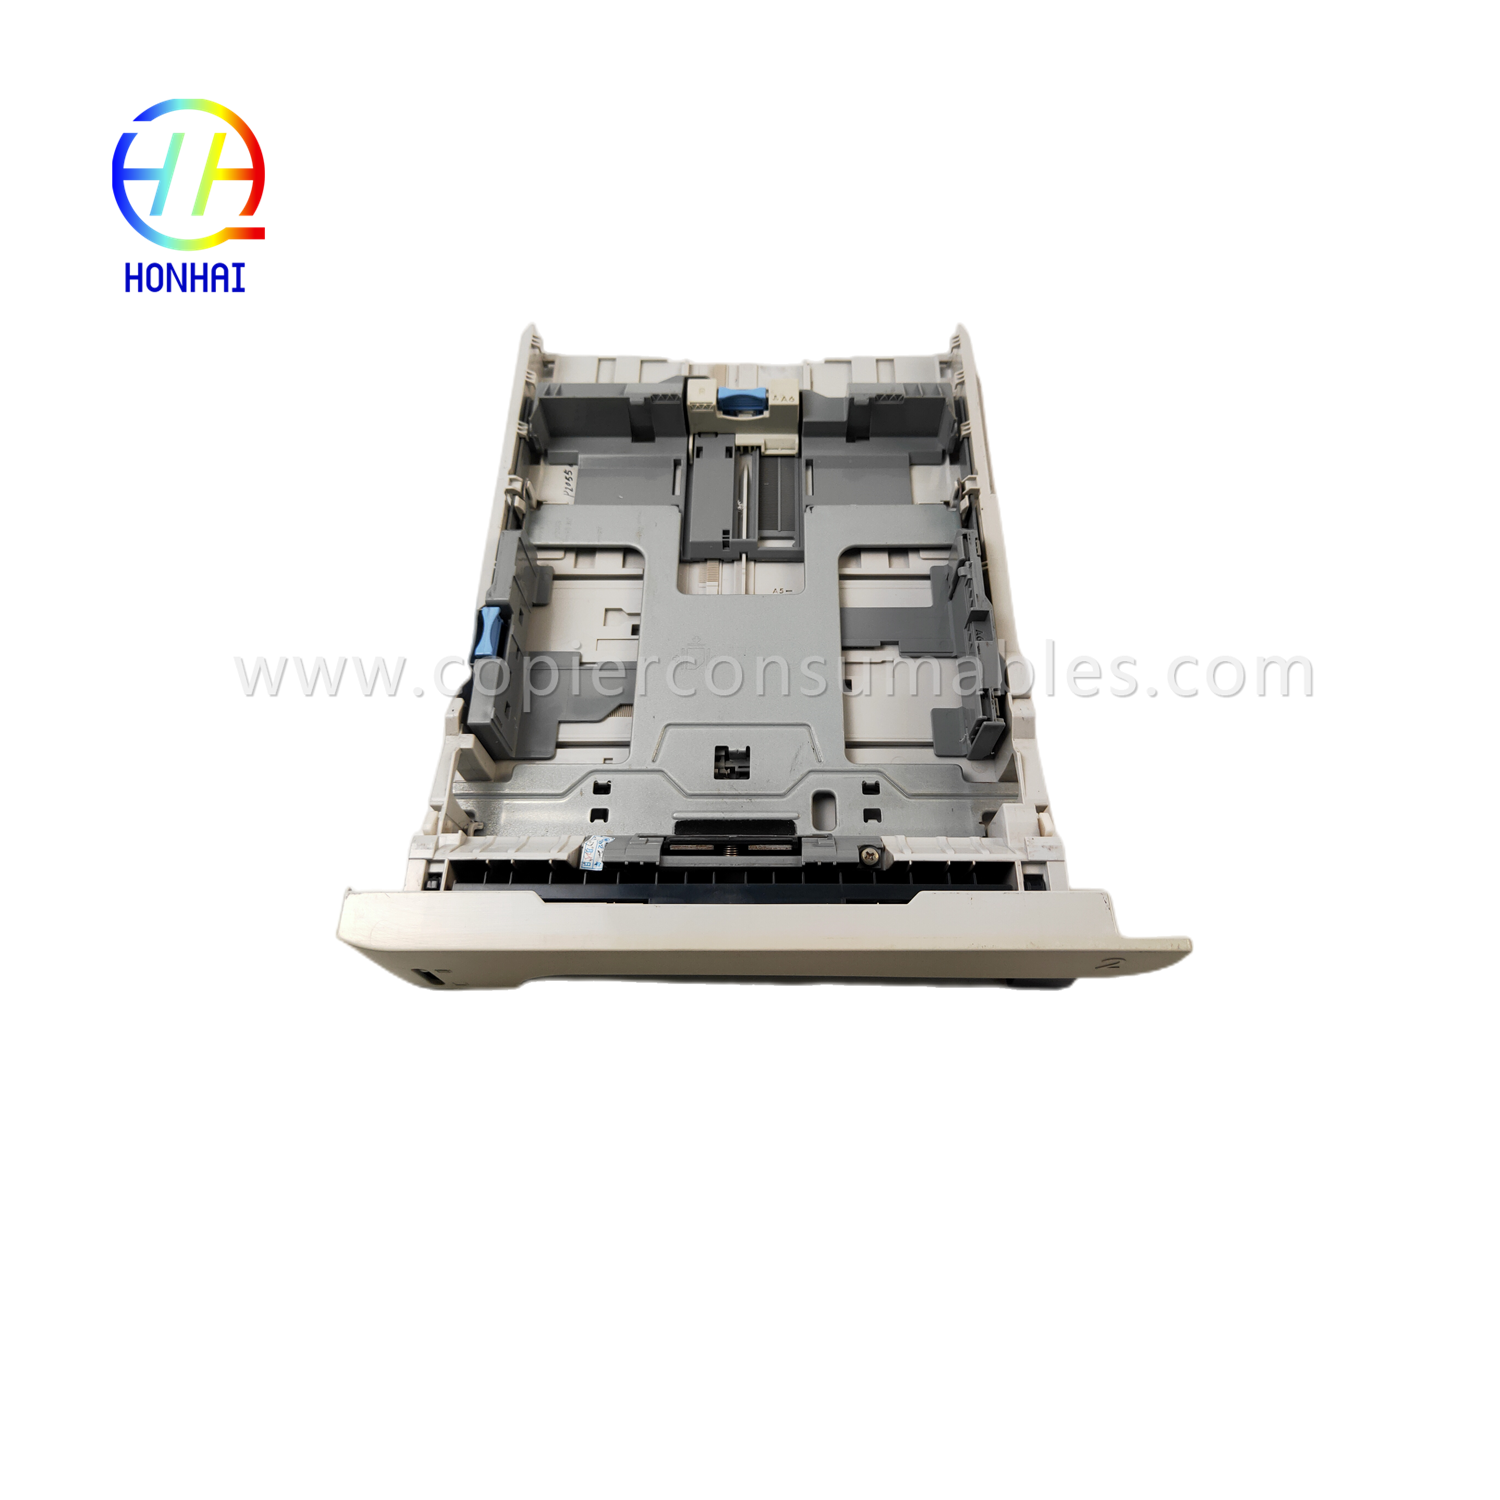 https://c585.goodao.net/paper-tray-assemble-for-xerox-phaser-3320dni-workcentre-3315dn-3325dni-050n00650-cassette-paper-tray-product/